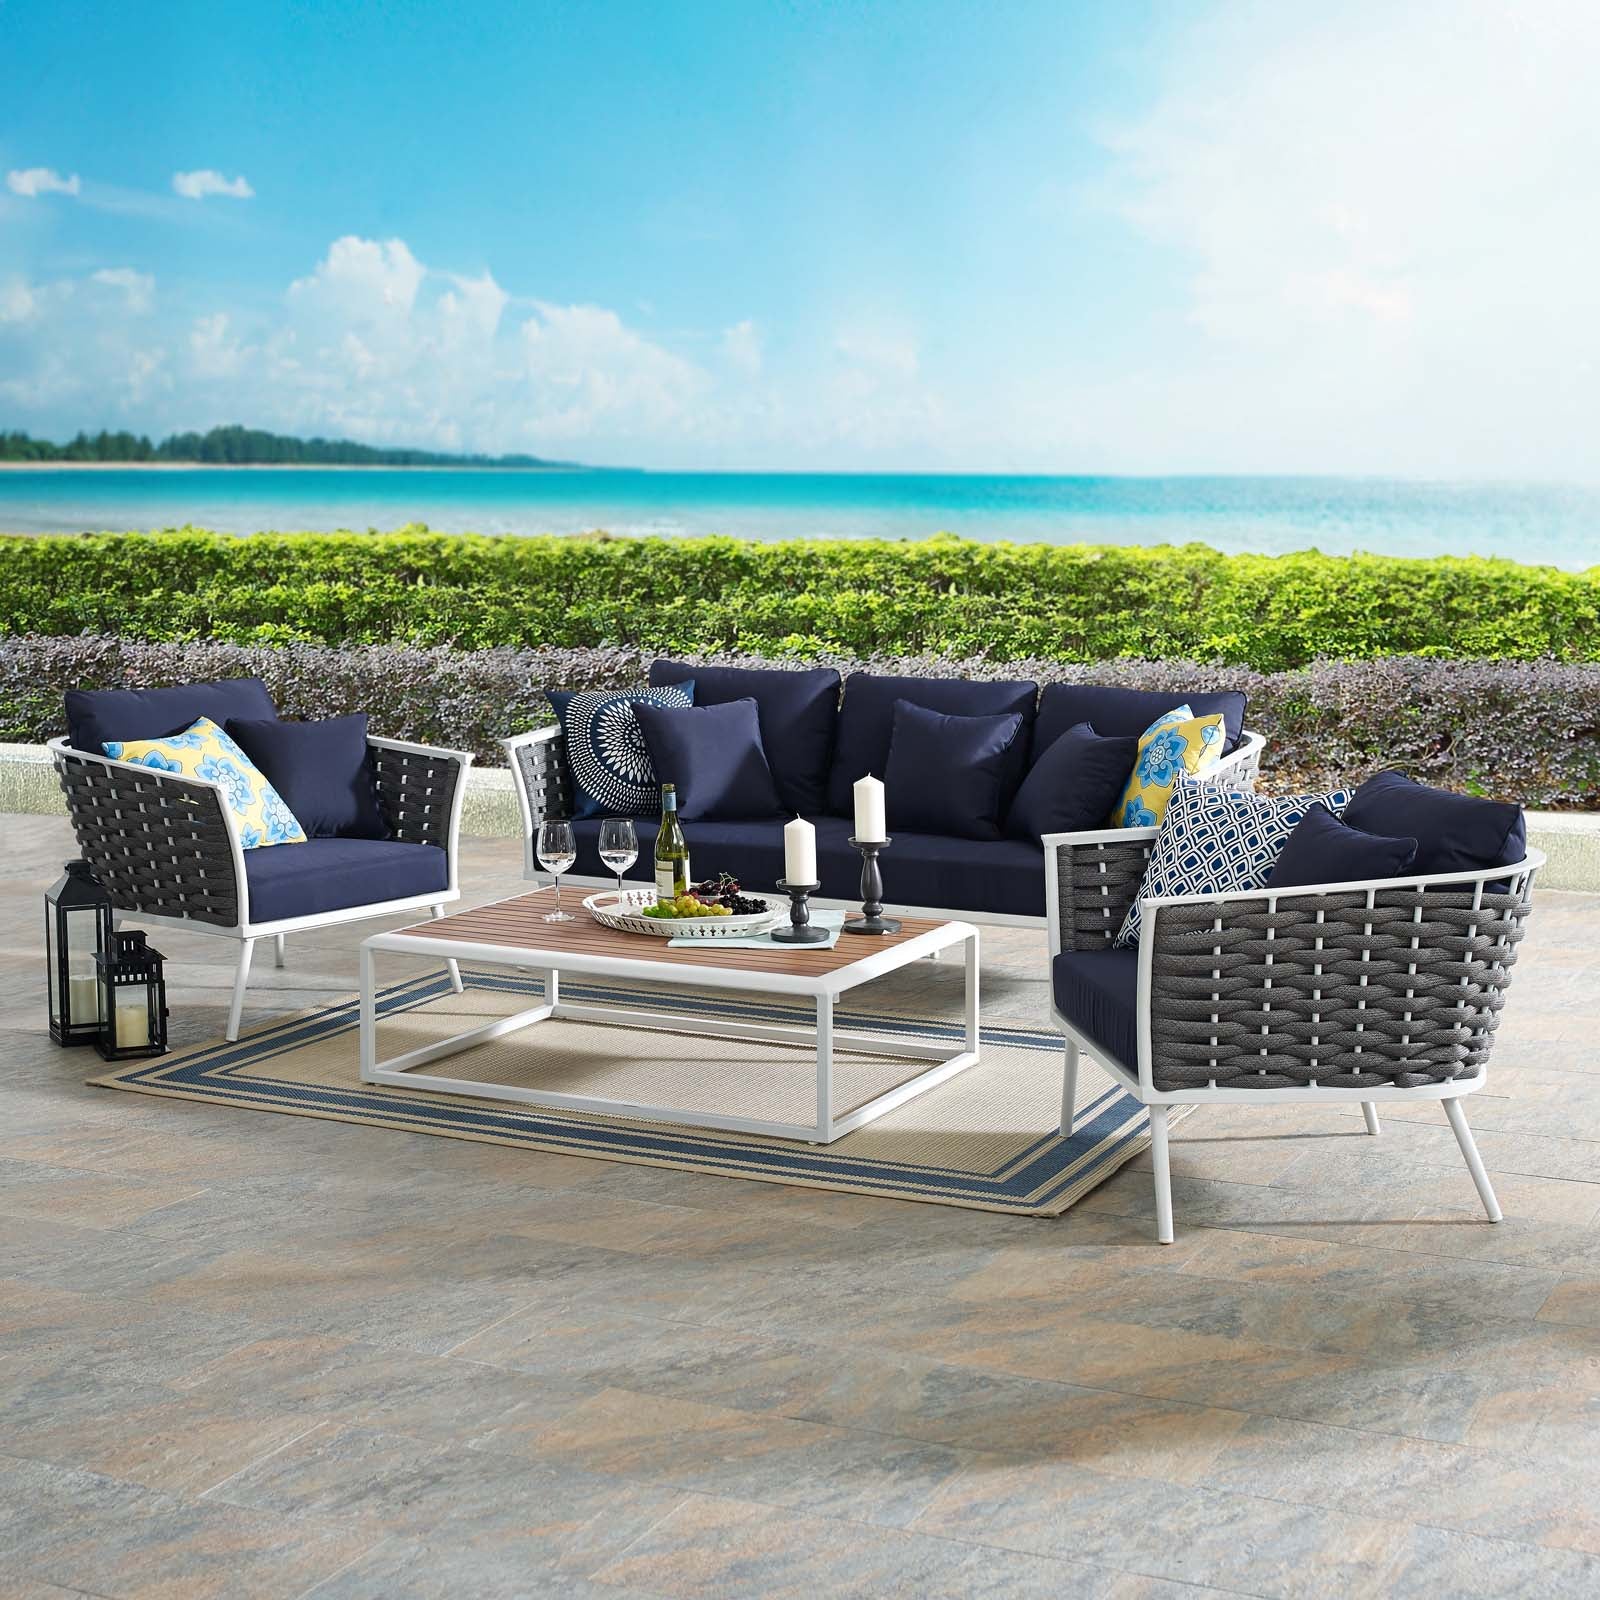 Stance 4 Piece Outdoor Patio Aluminum Sectional Sofa Set - East Shore Modern Home Furnishings